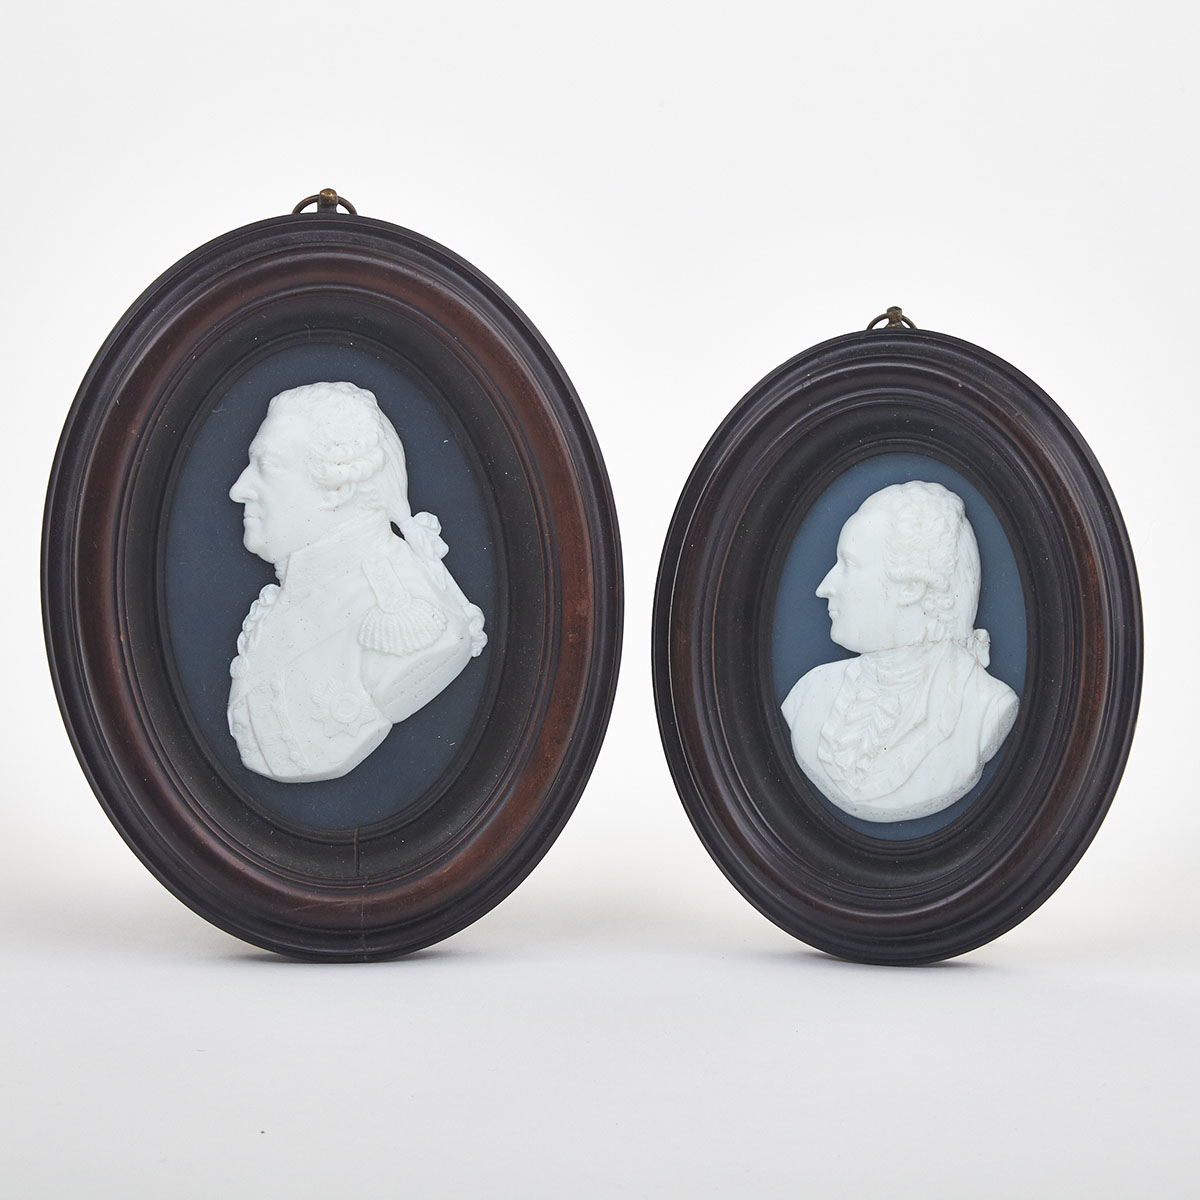 Two Tassie Glass Paste Relief Portraits, late 18th century